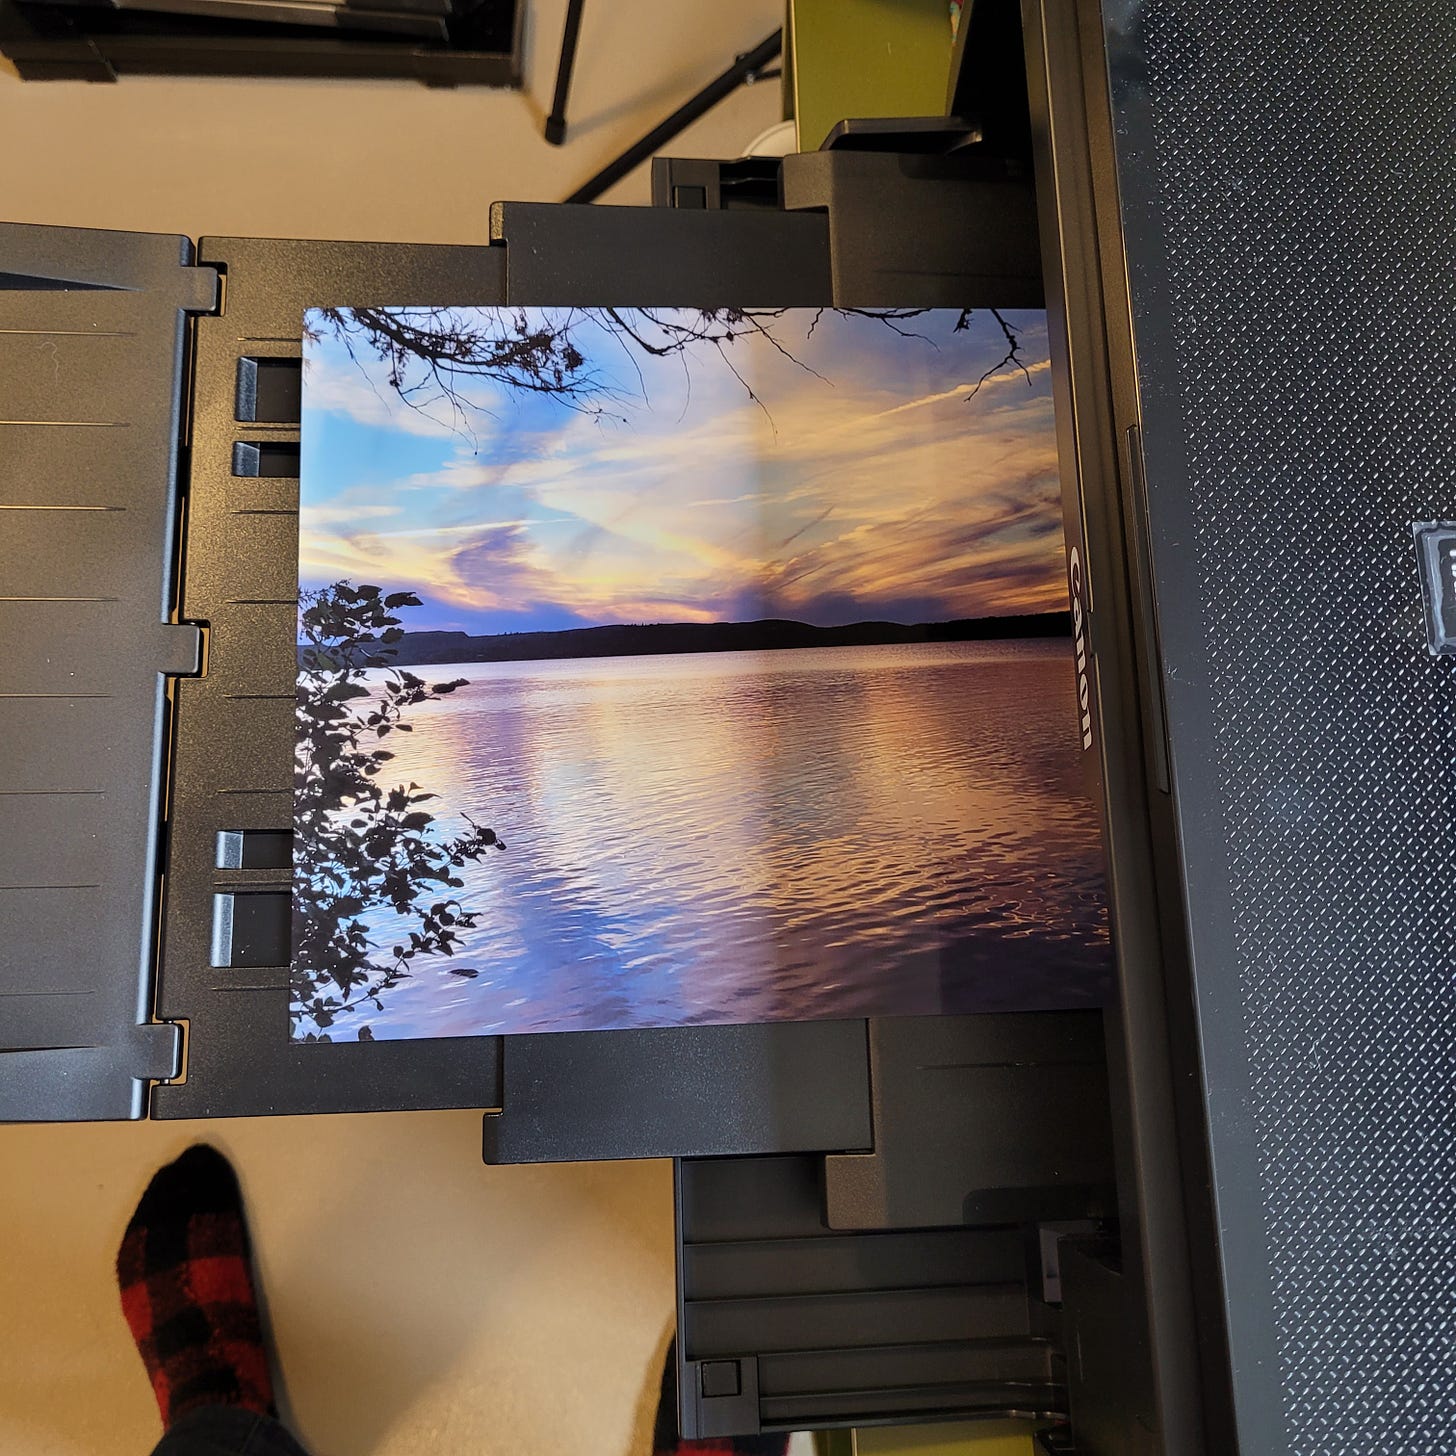 Freshly printed on my new printer: a photograph I took of the sunset over Gunflint Lake in the Boundary Waters of Minnesota. The colors are dazzling pinks, peaches, violets and blues.